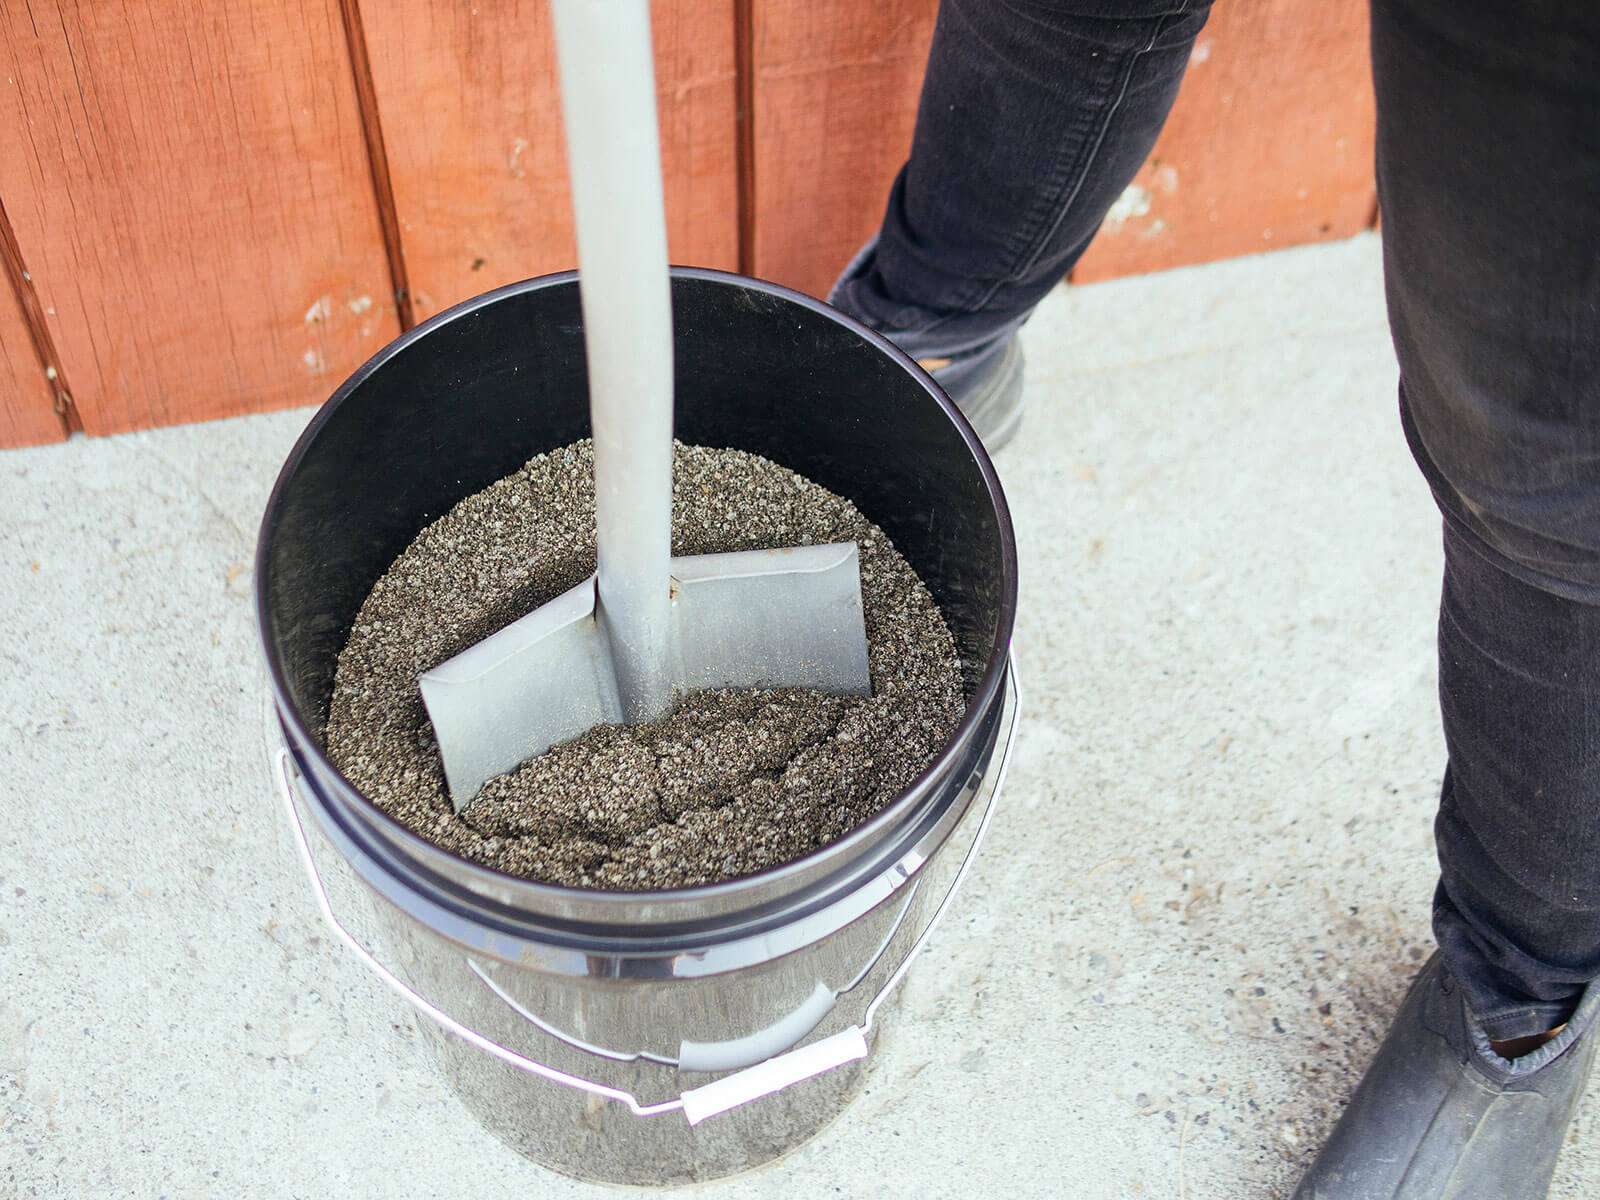 Shovel inserted into a 5-gallon bucket filled with oily sand